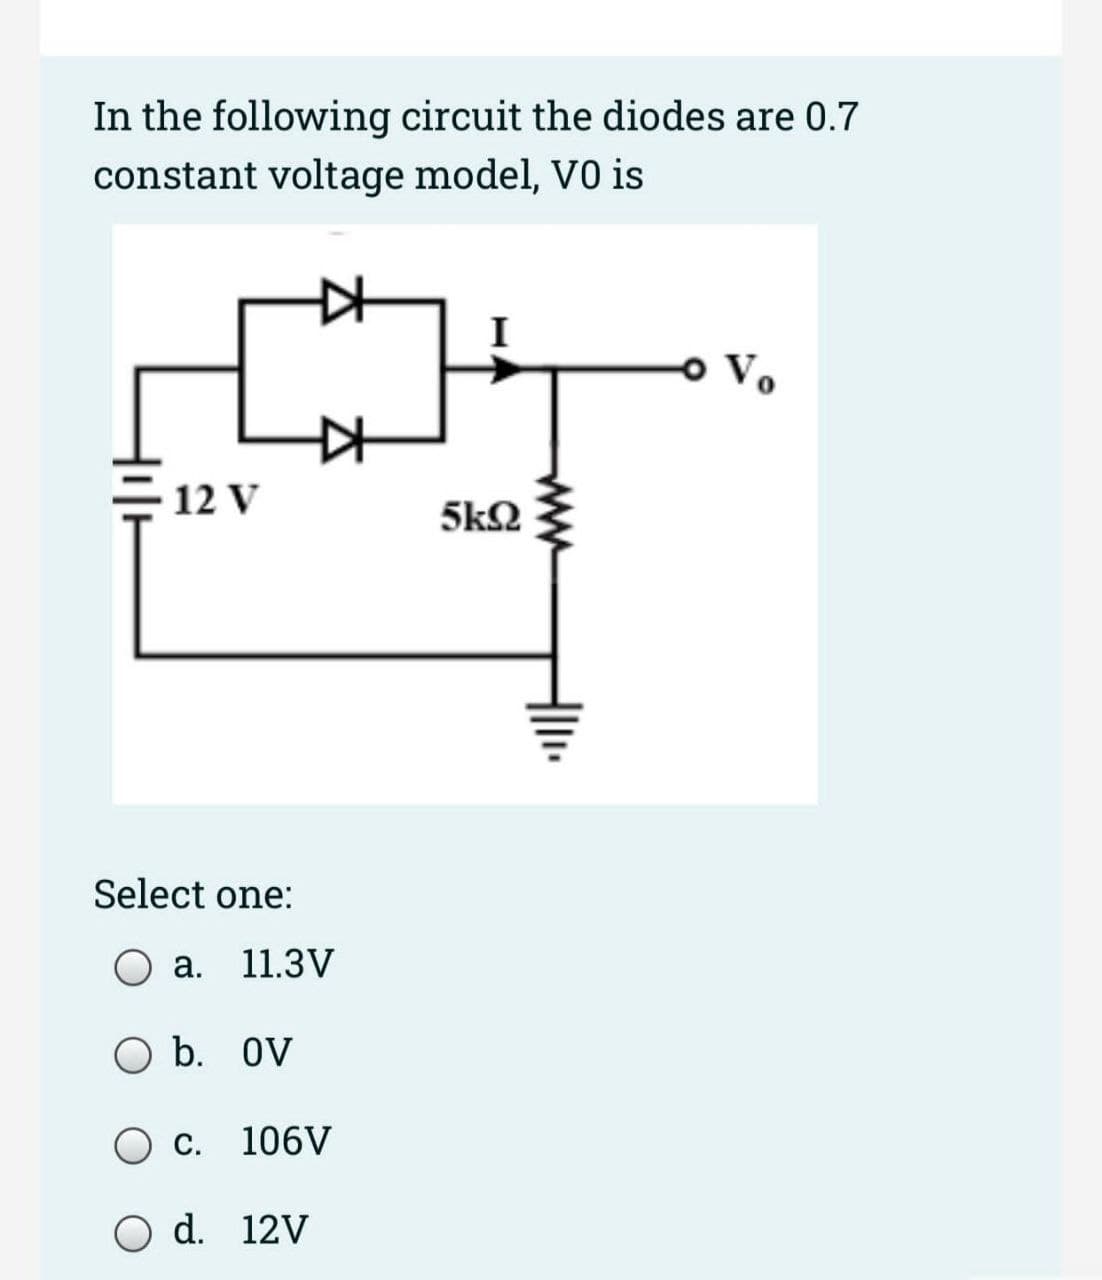 In the following circuit the diodes are 0.7
constant voltage model, VO is
12 V
Select one:
a. 11.3V
b. OV
C. 106V
d. 12V
I
5kQ2
- Vo